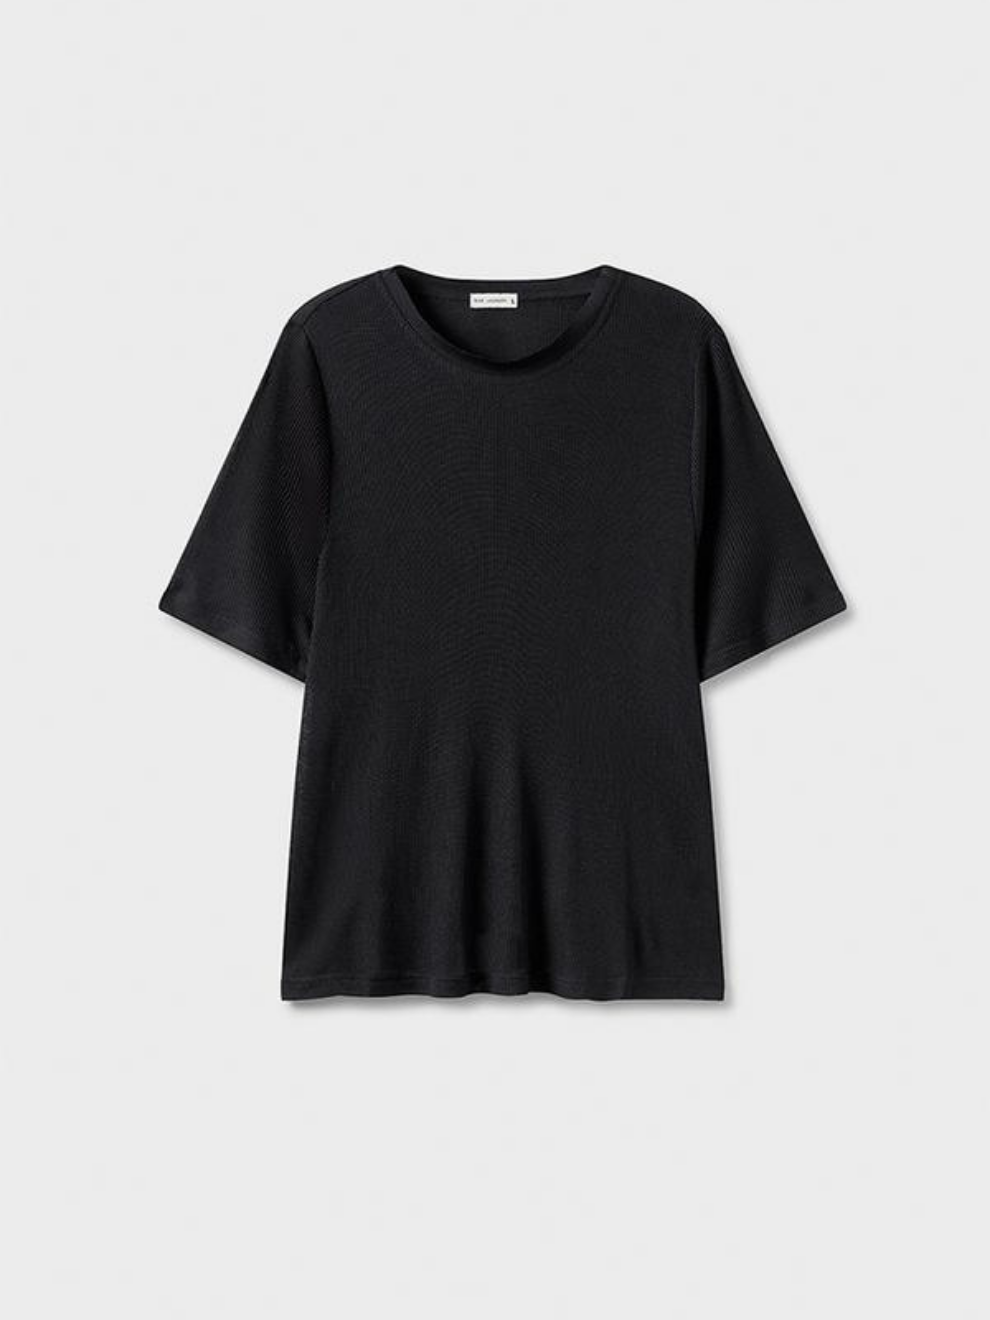 Ribbed T-Shirt in Black